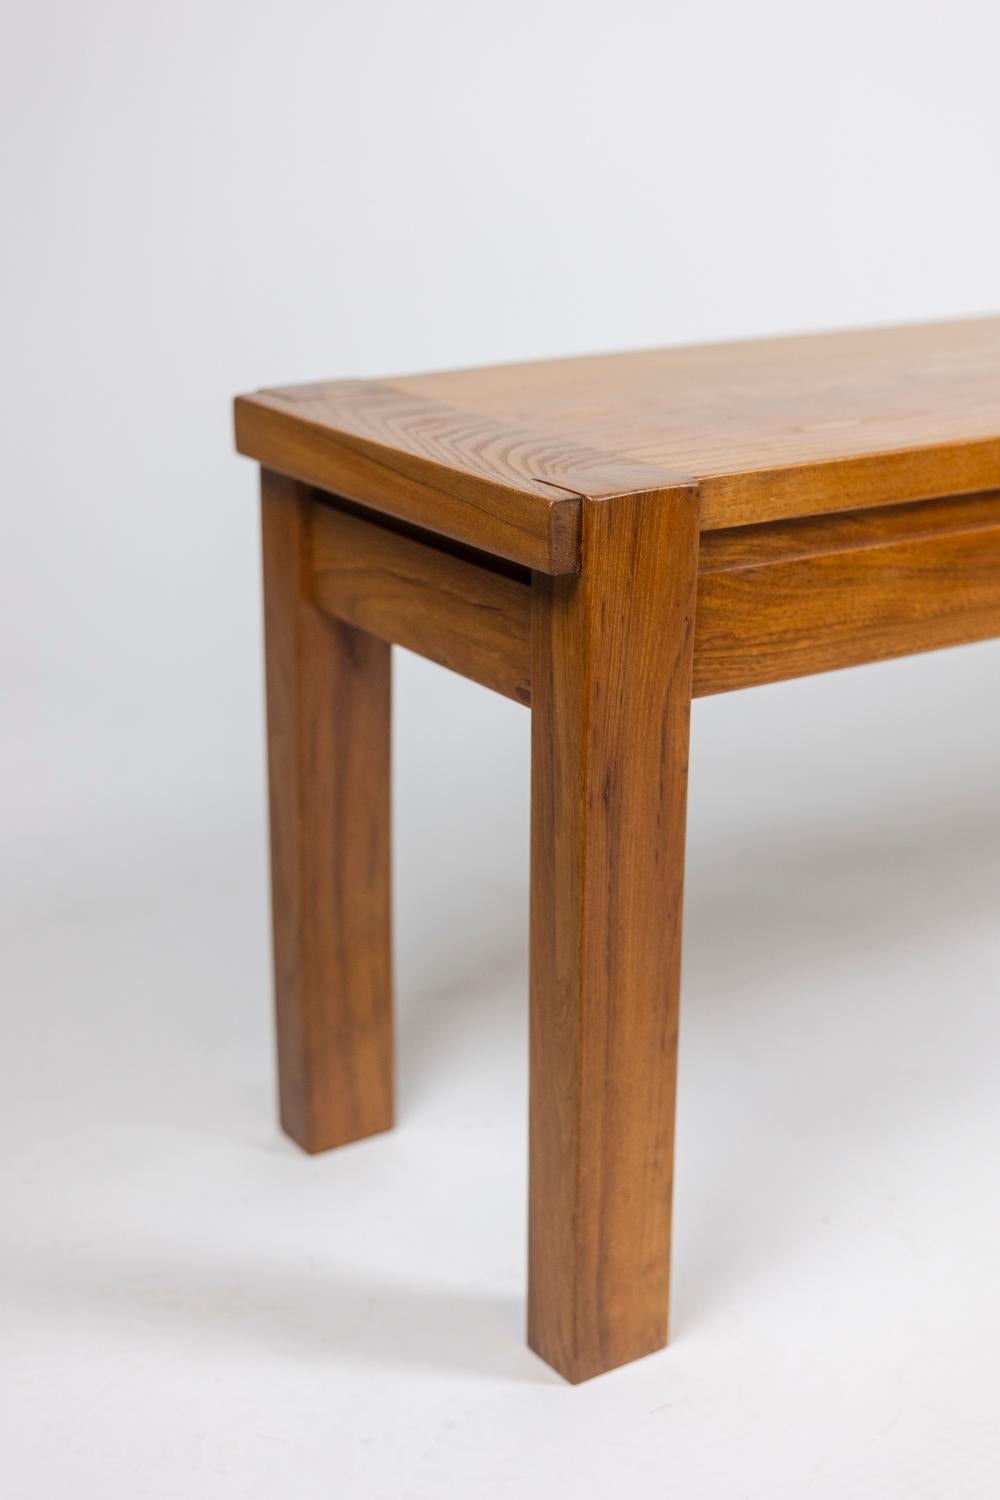 Maison Seltz, Bench in Elm, 1960s For Sale 2